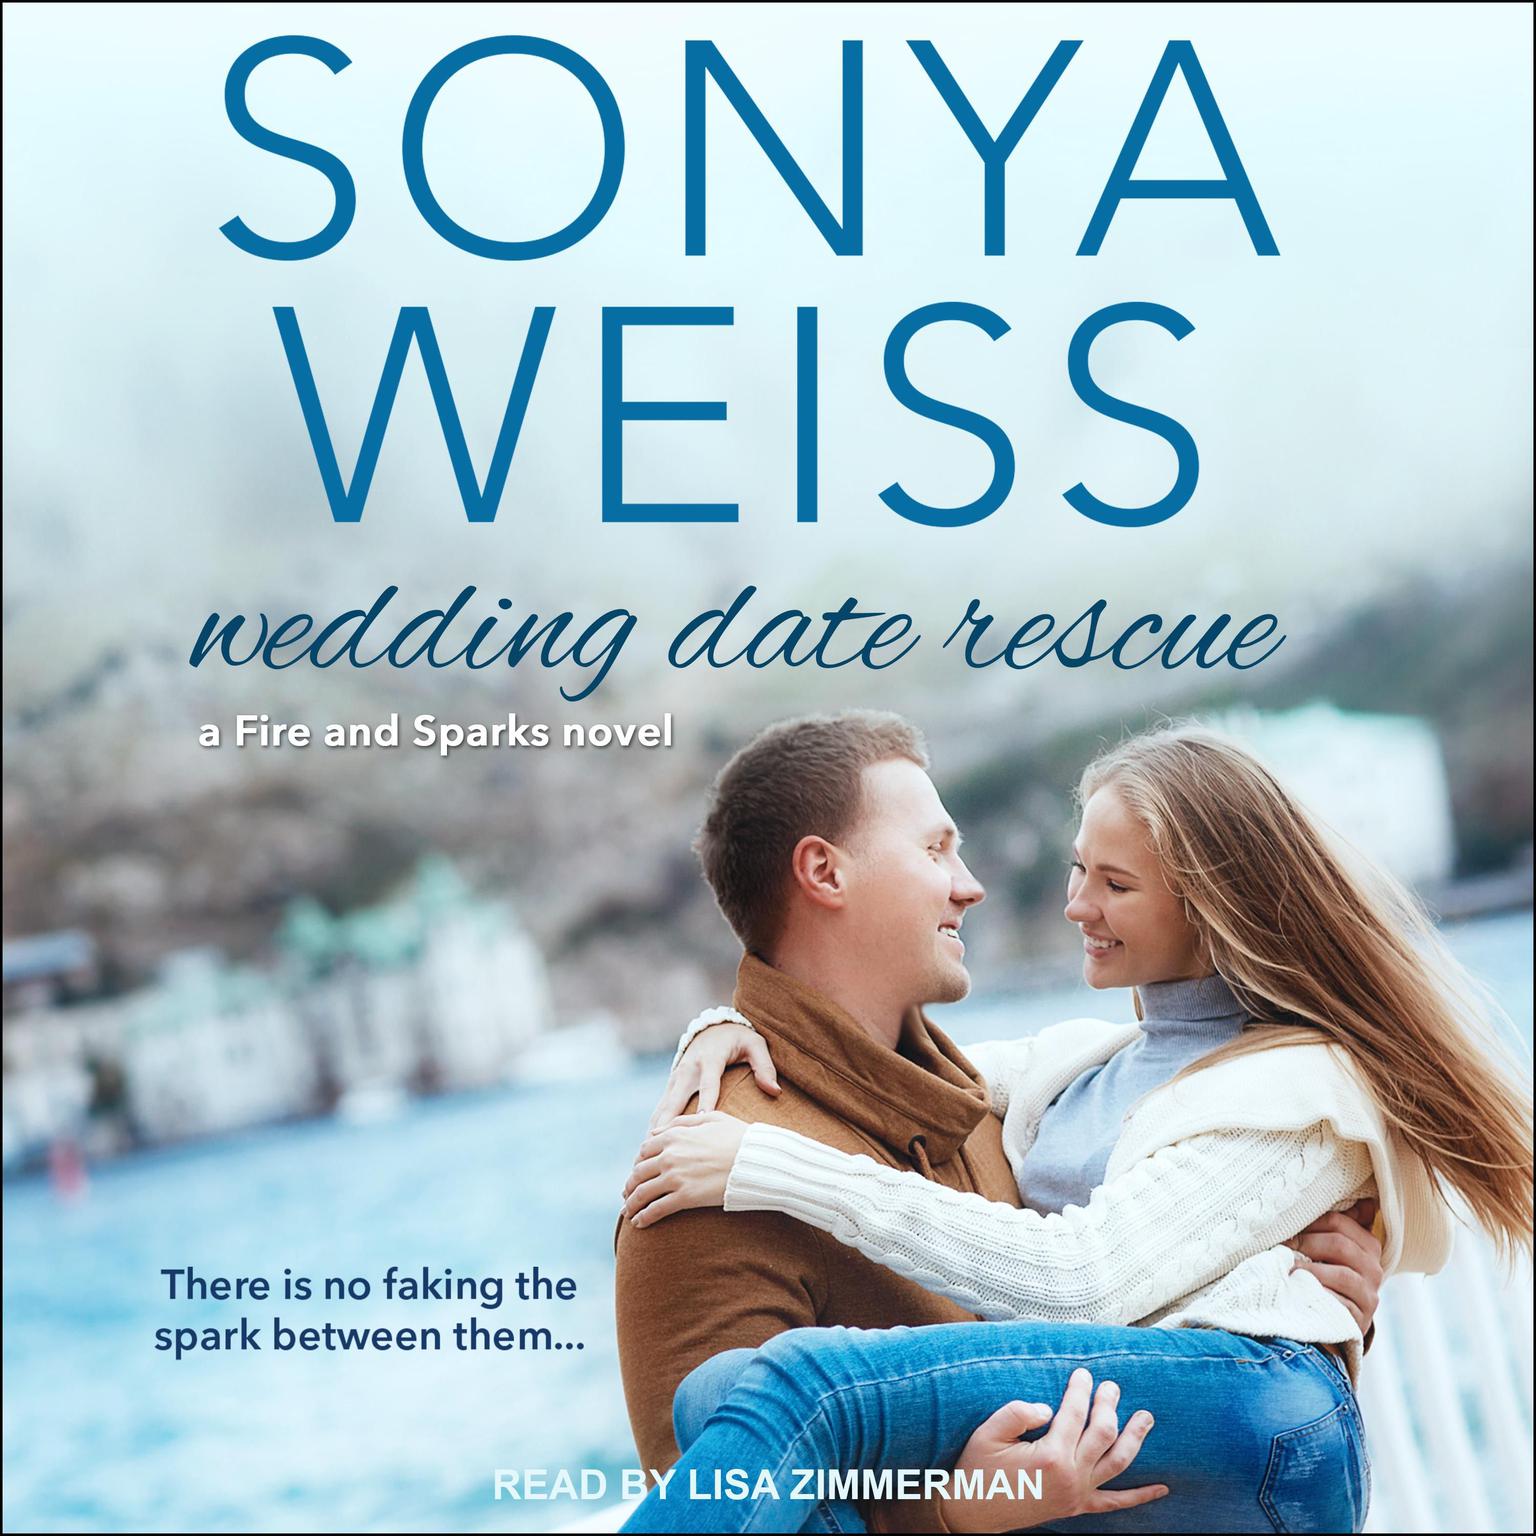 Wedding Date Rescue Audiobook, by Sonya Weiss